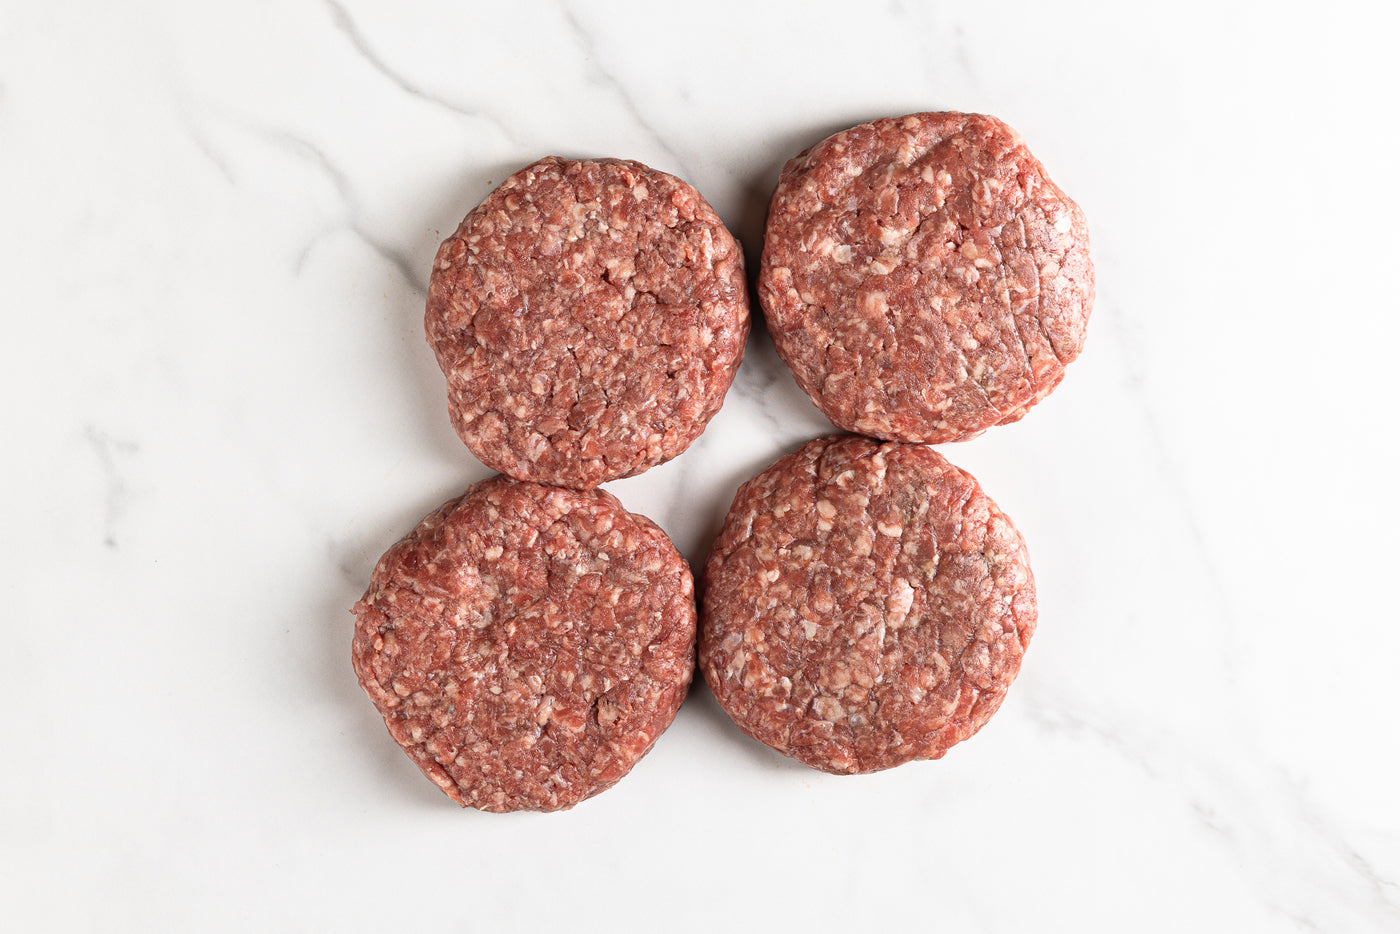 4 burgers on marble background